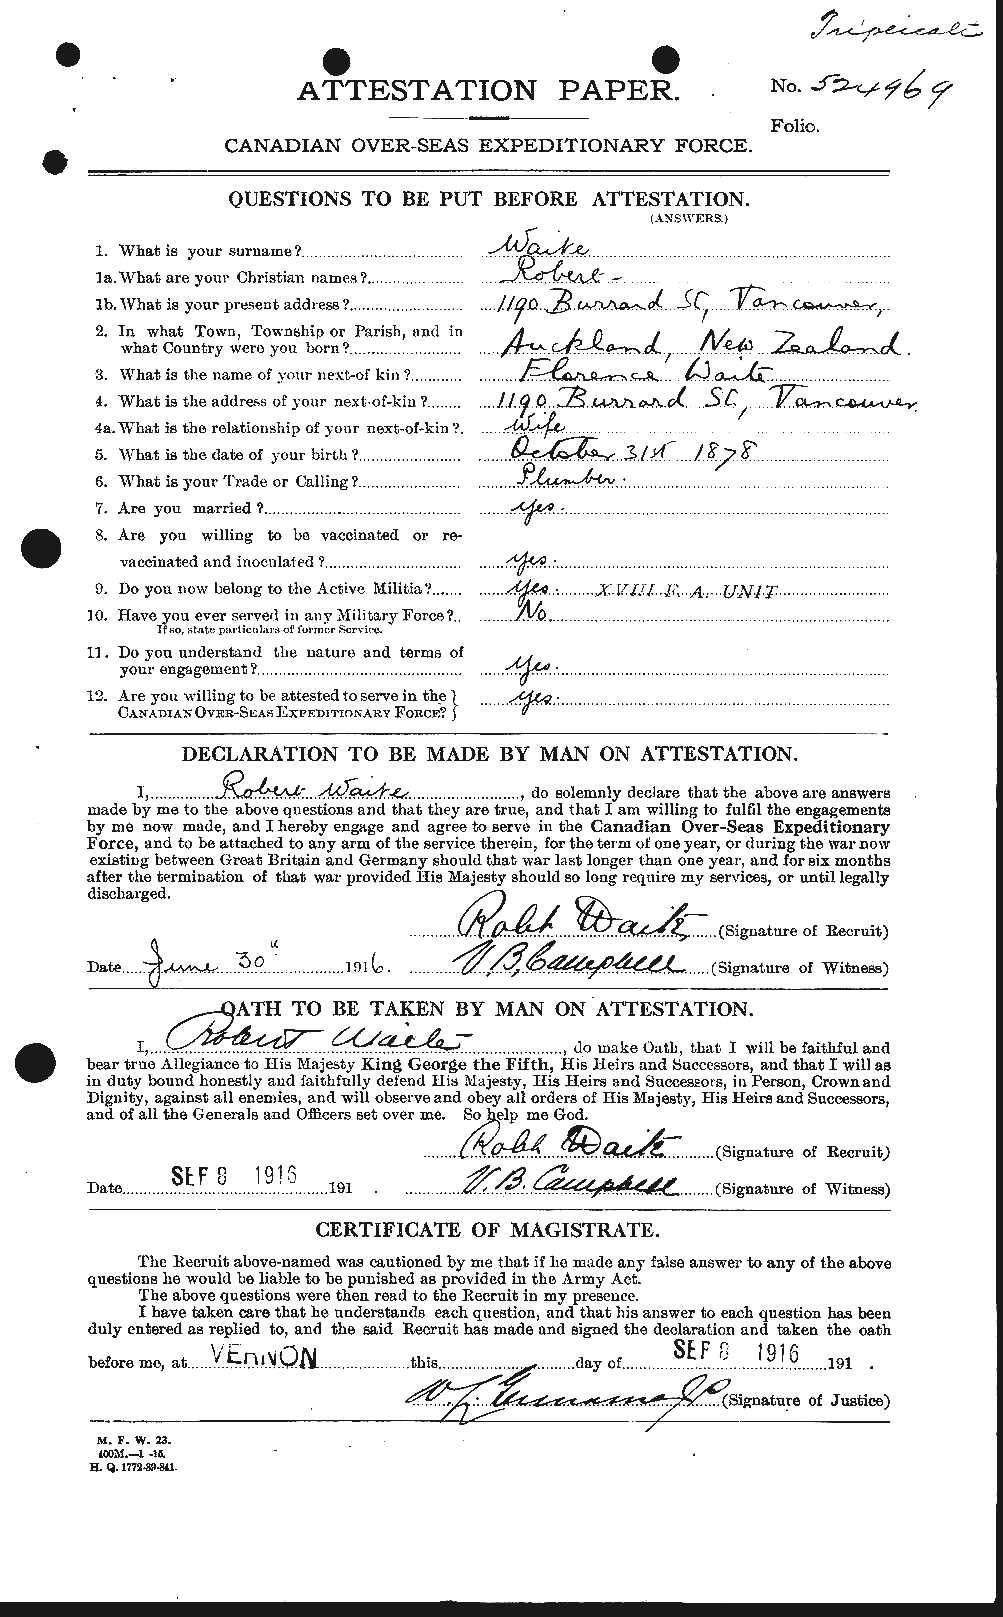 Personnel Records of the First World War - CEF 654298a